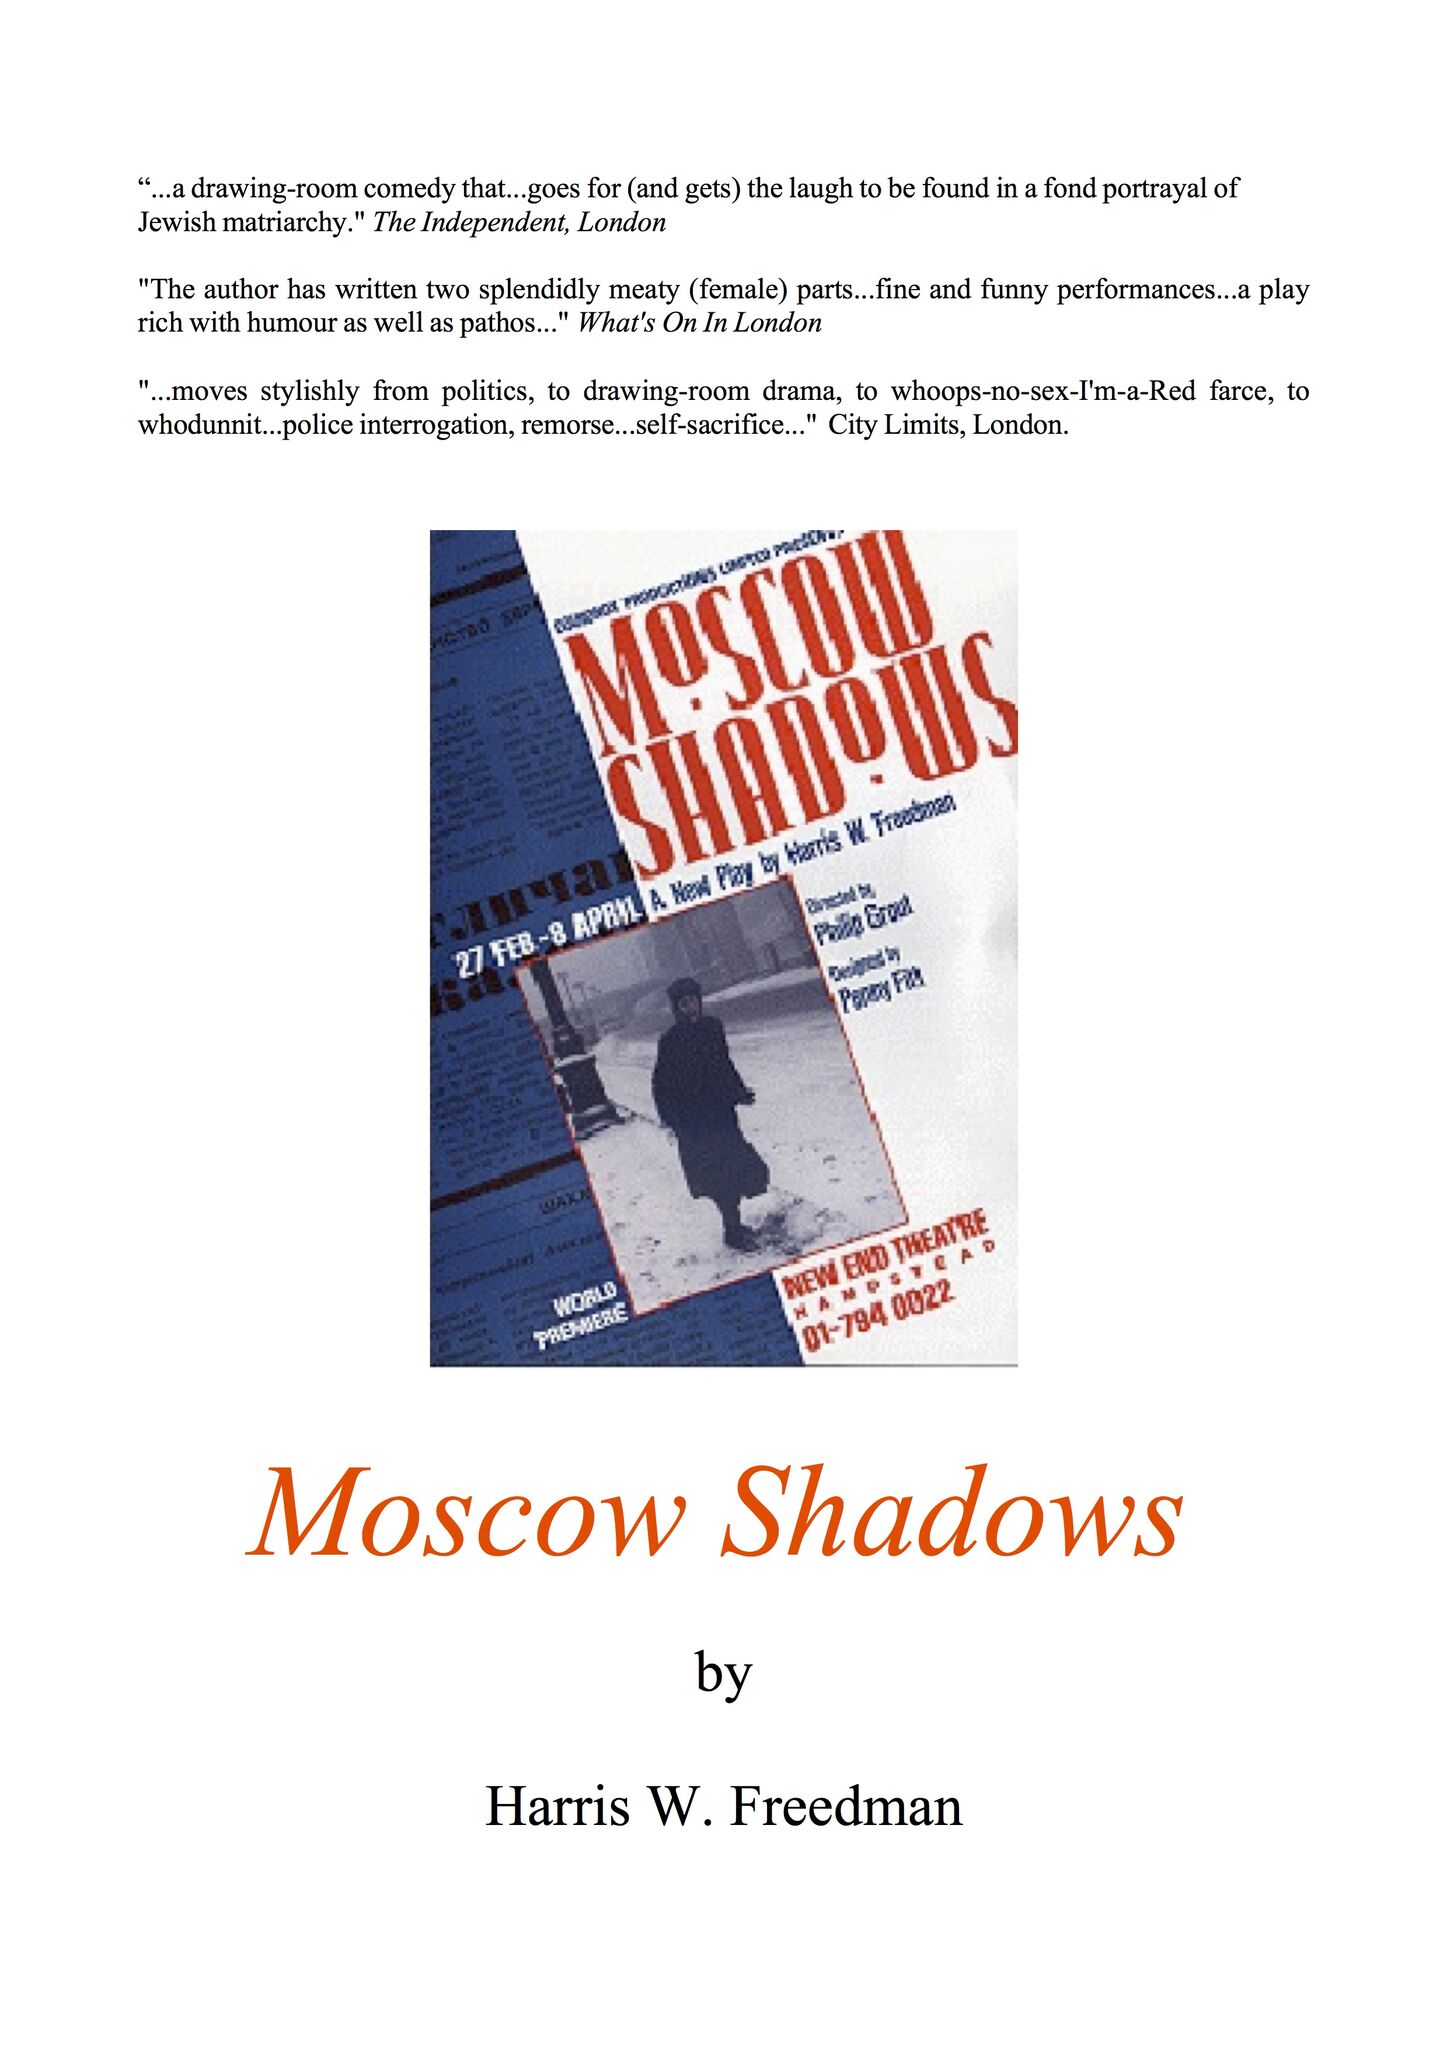 MOSCOW SHADOWS